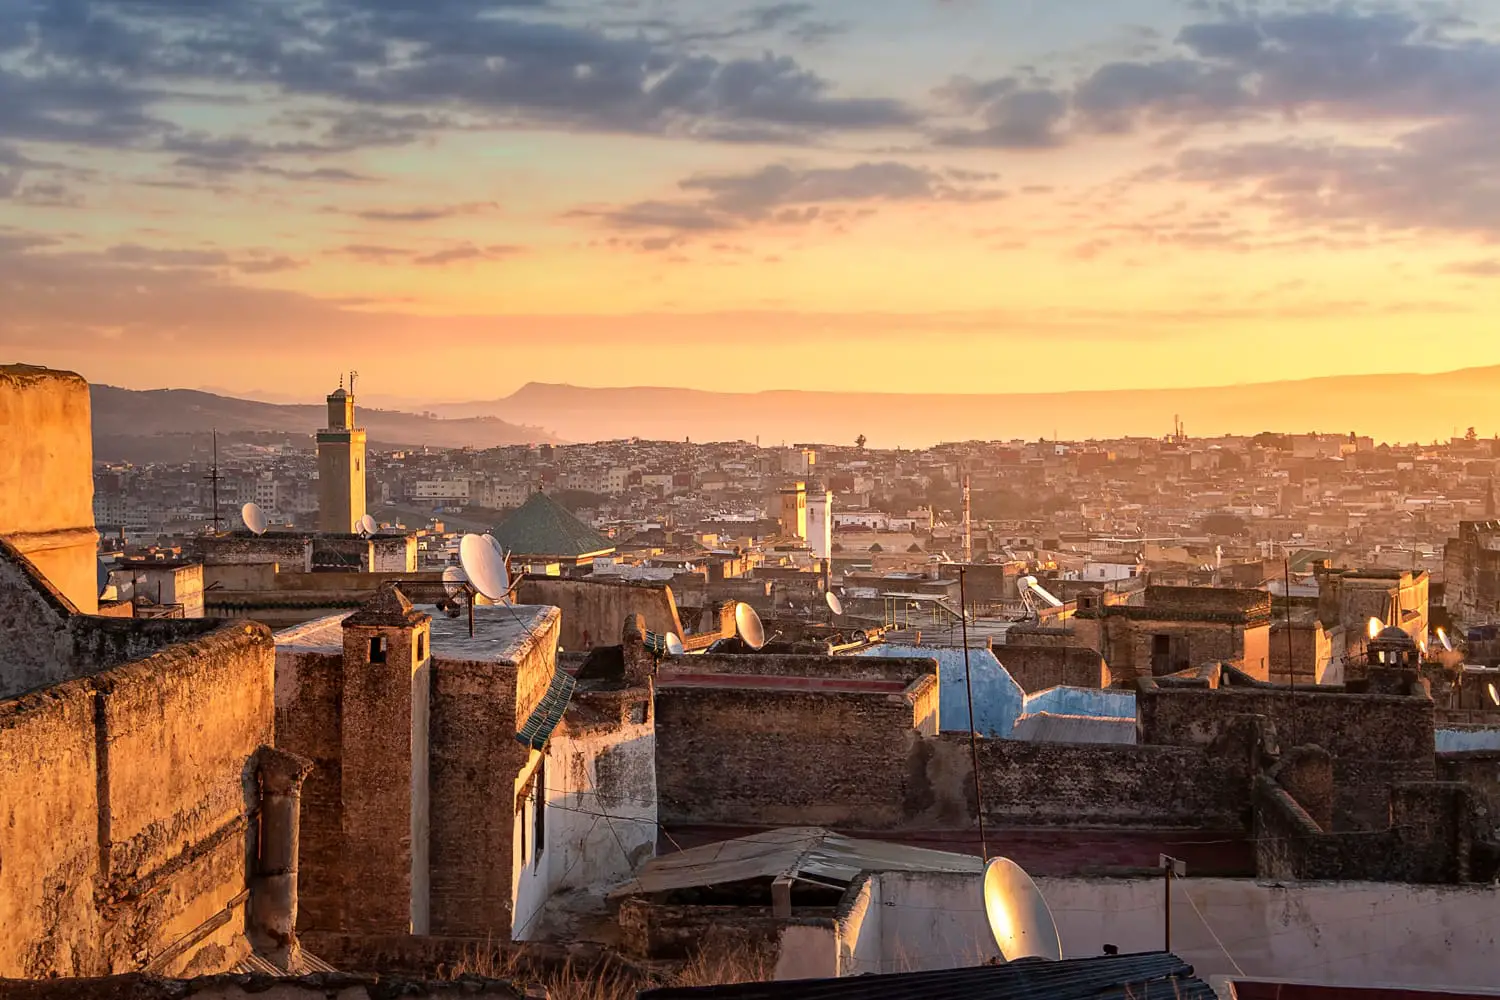 View of the old Medina in Fez (Fes El Bali), Morocco at sunrise.